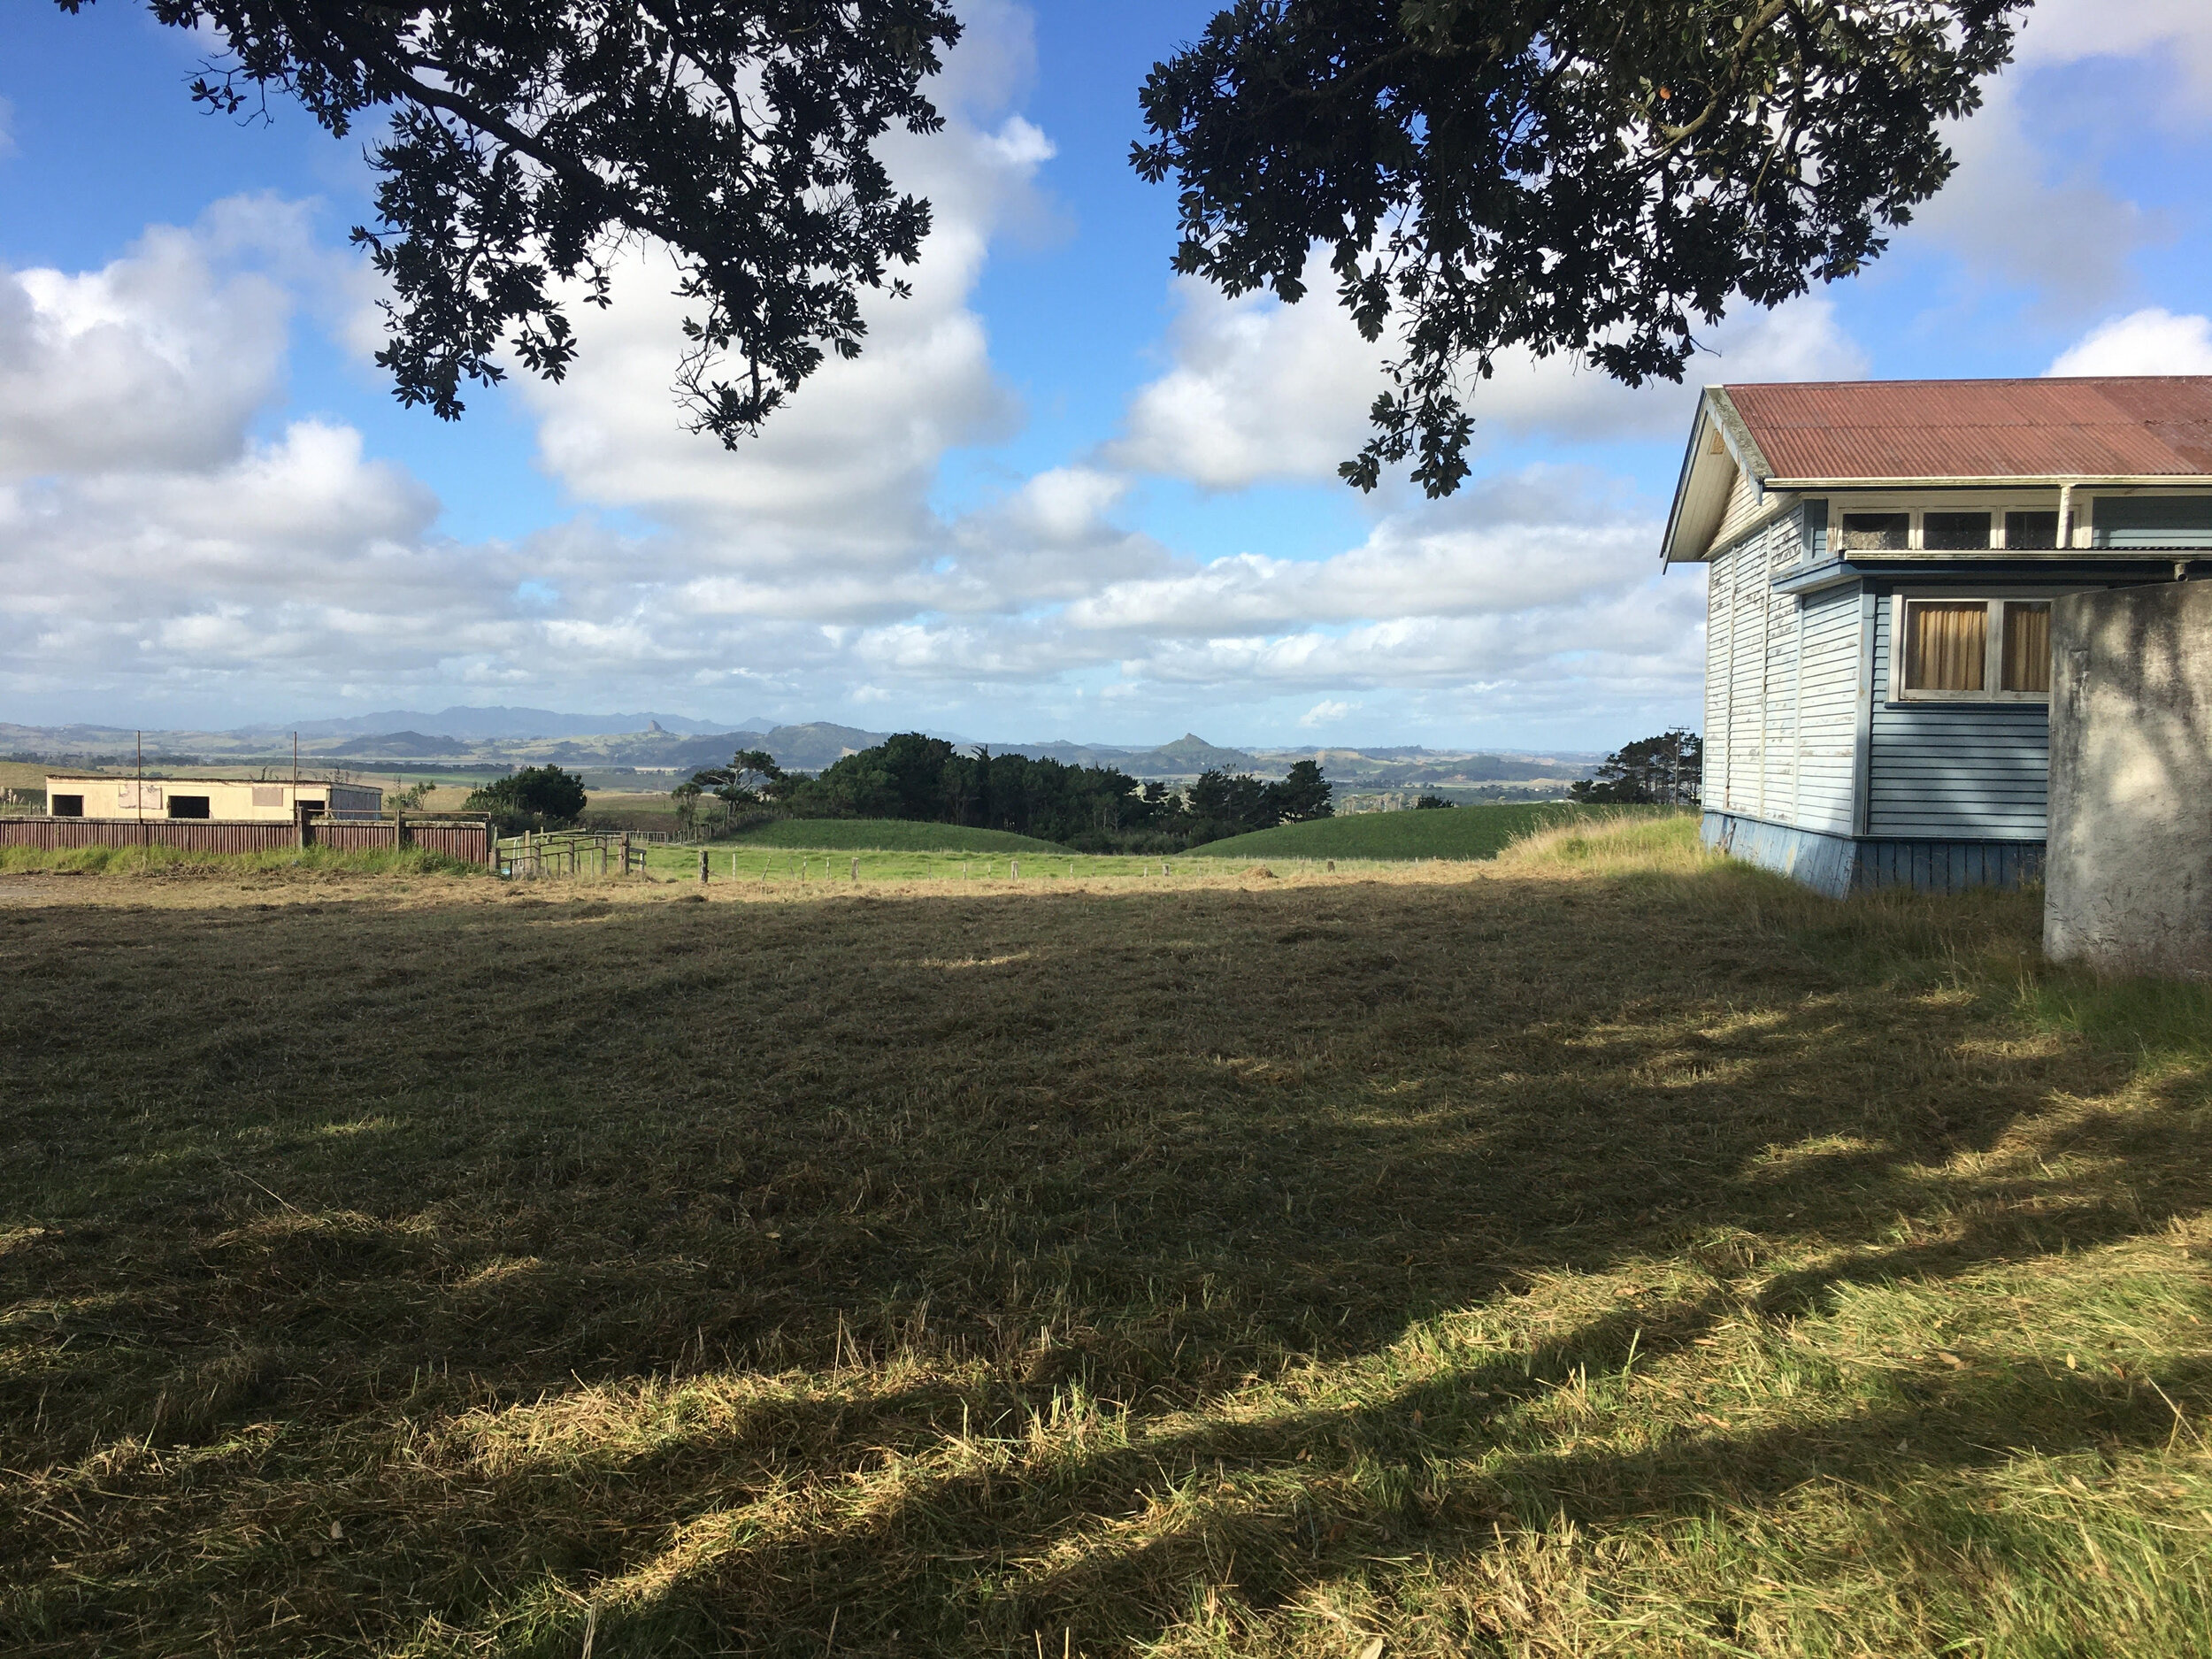 Sometimes planning requires someone mowing the lawns. However, it’s not often you do it with a tractor! We’re looking at you, Matthew; those Te Maire School grounds are looking spectacular.